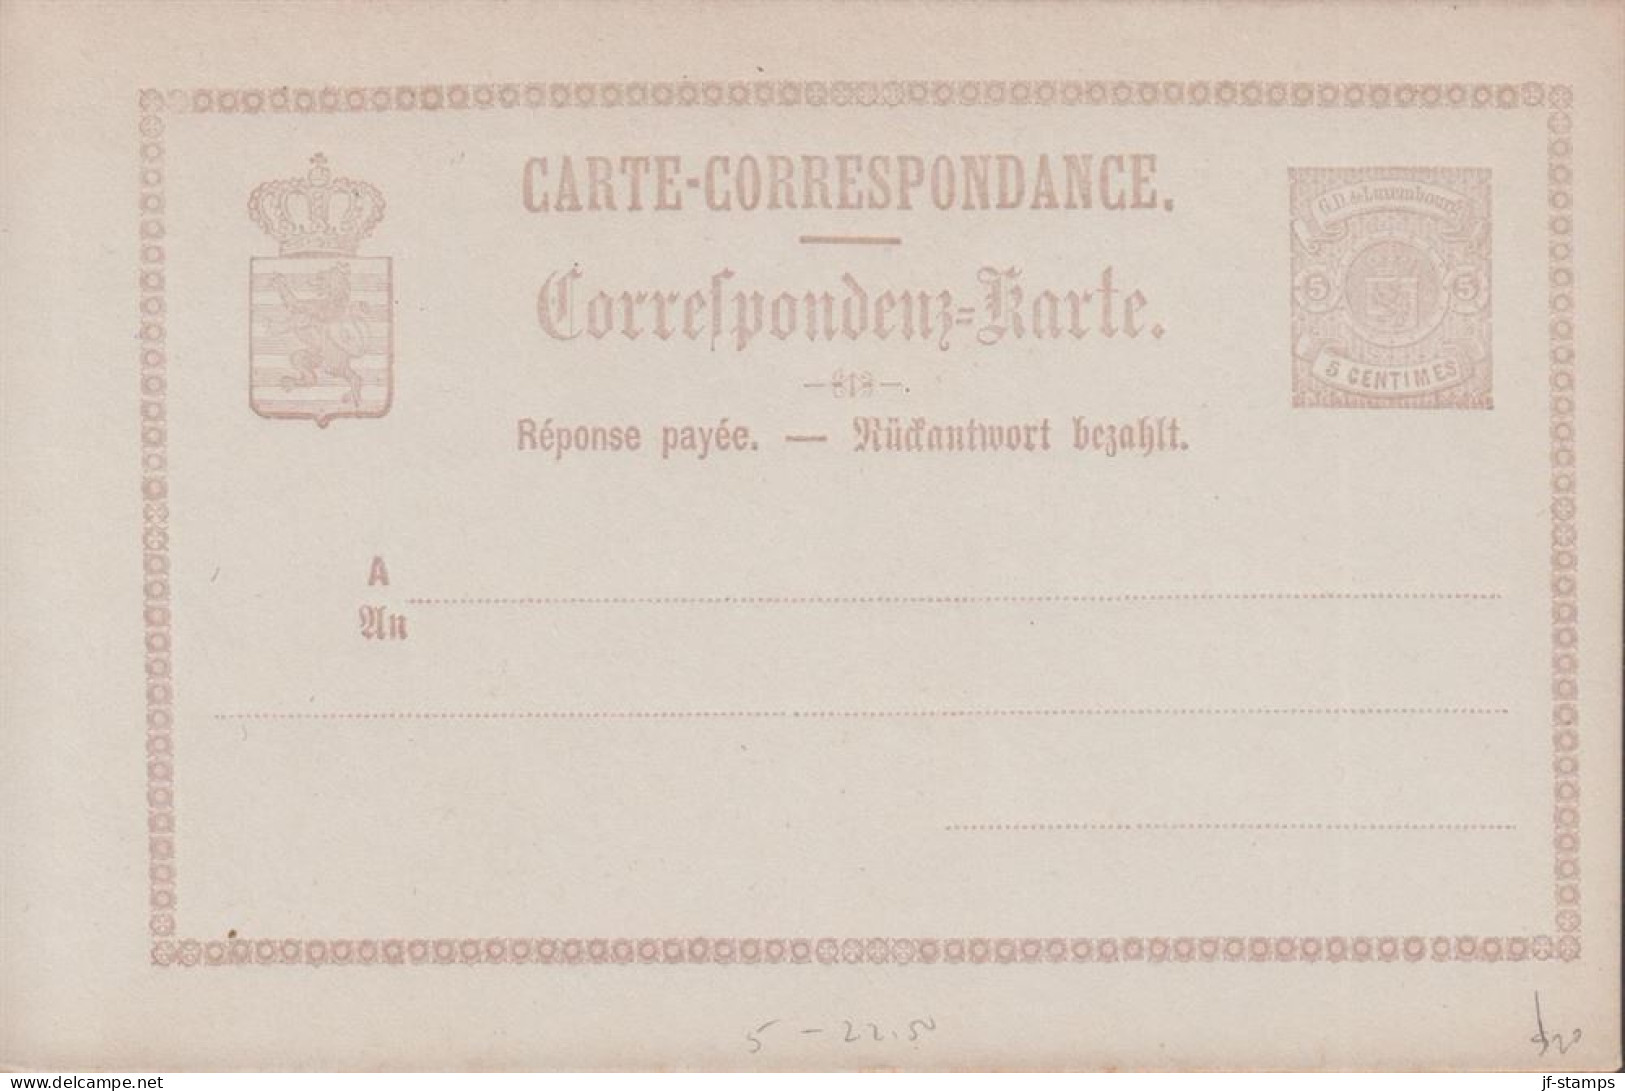 1874. LUXEMBOURG. CARTE-CORRESPONDANCE. 5 CENTIMES Double Card With Response Payee.  - JF445173 - Entiers Postaux